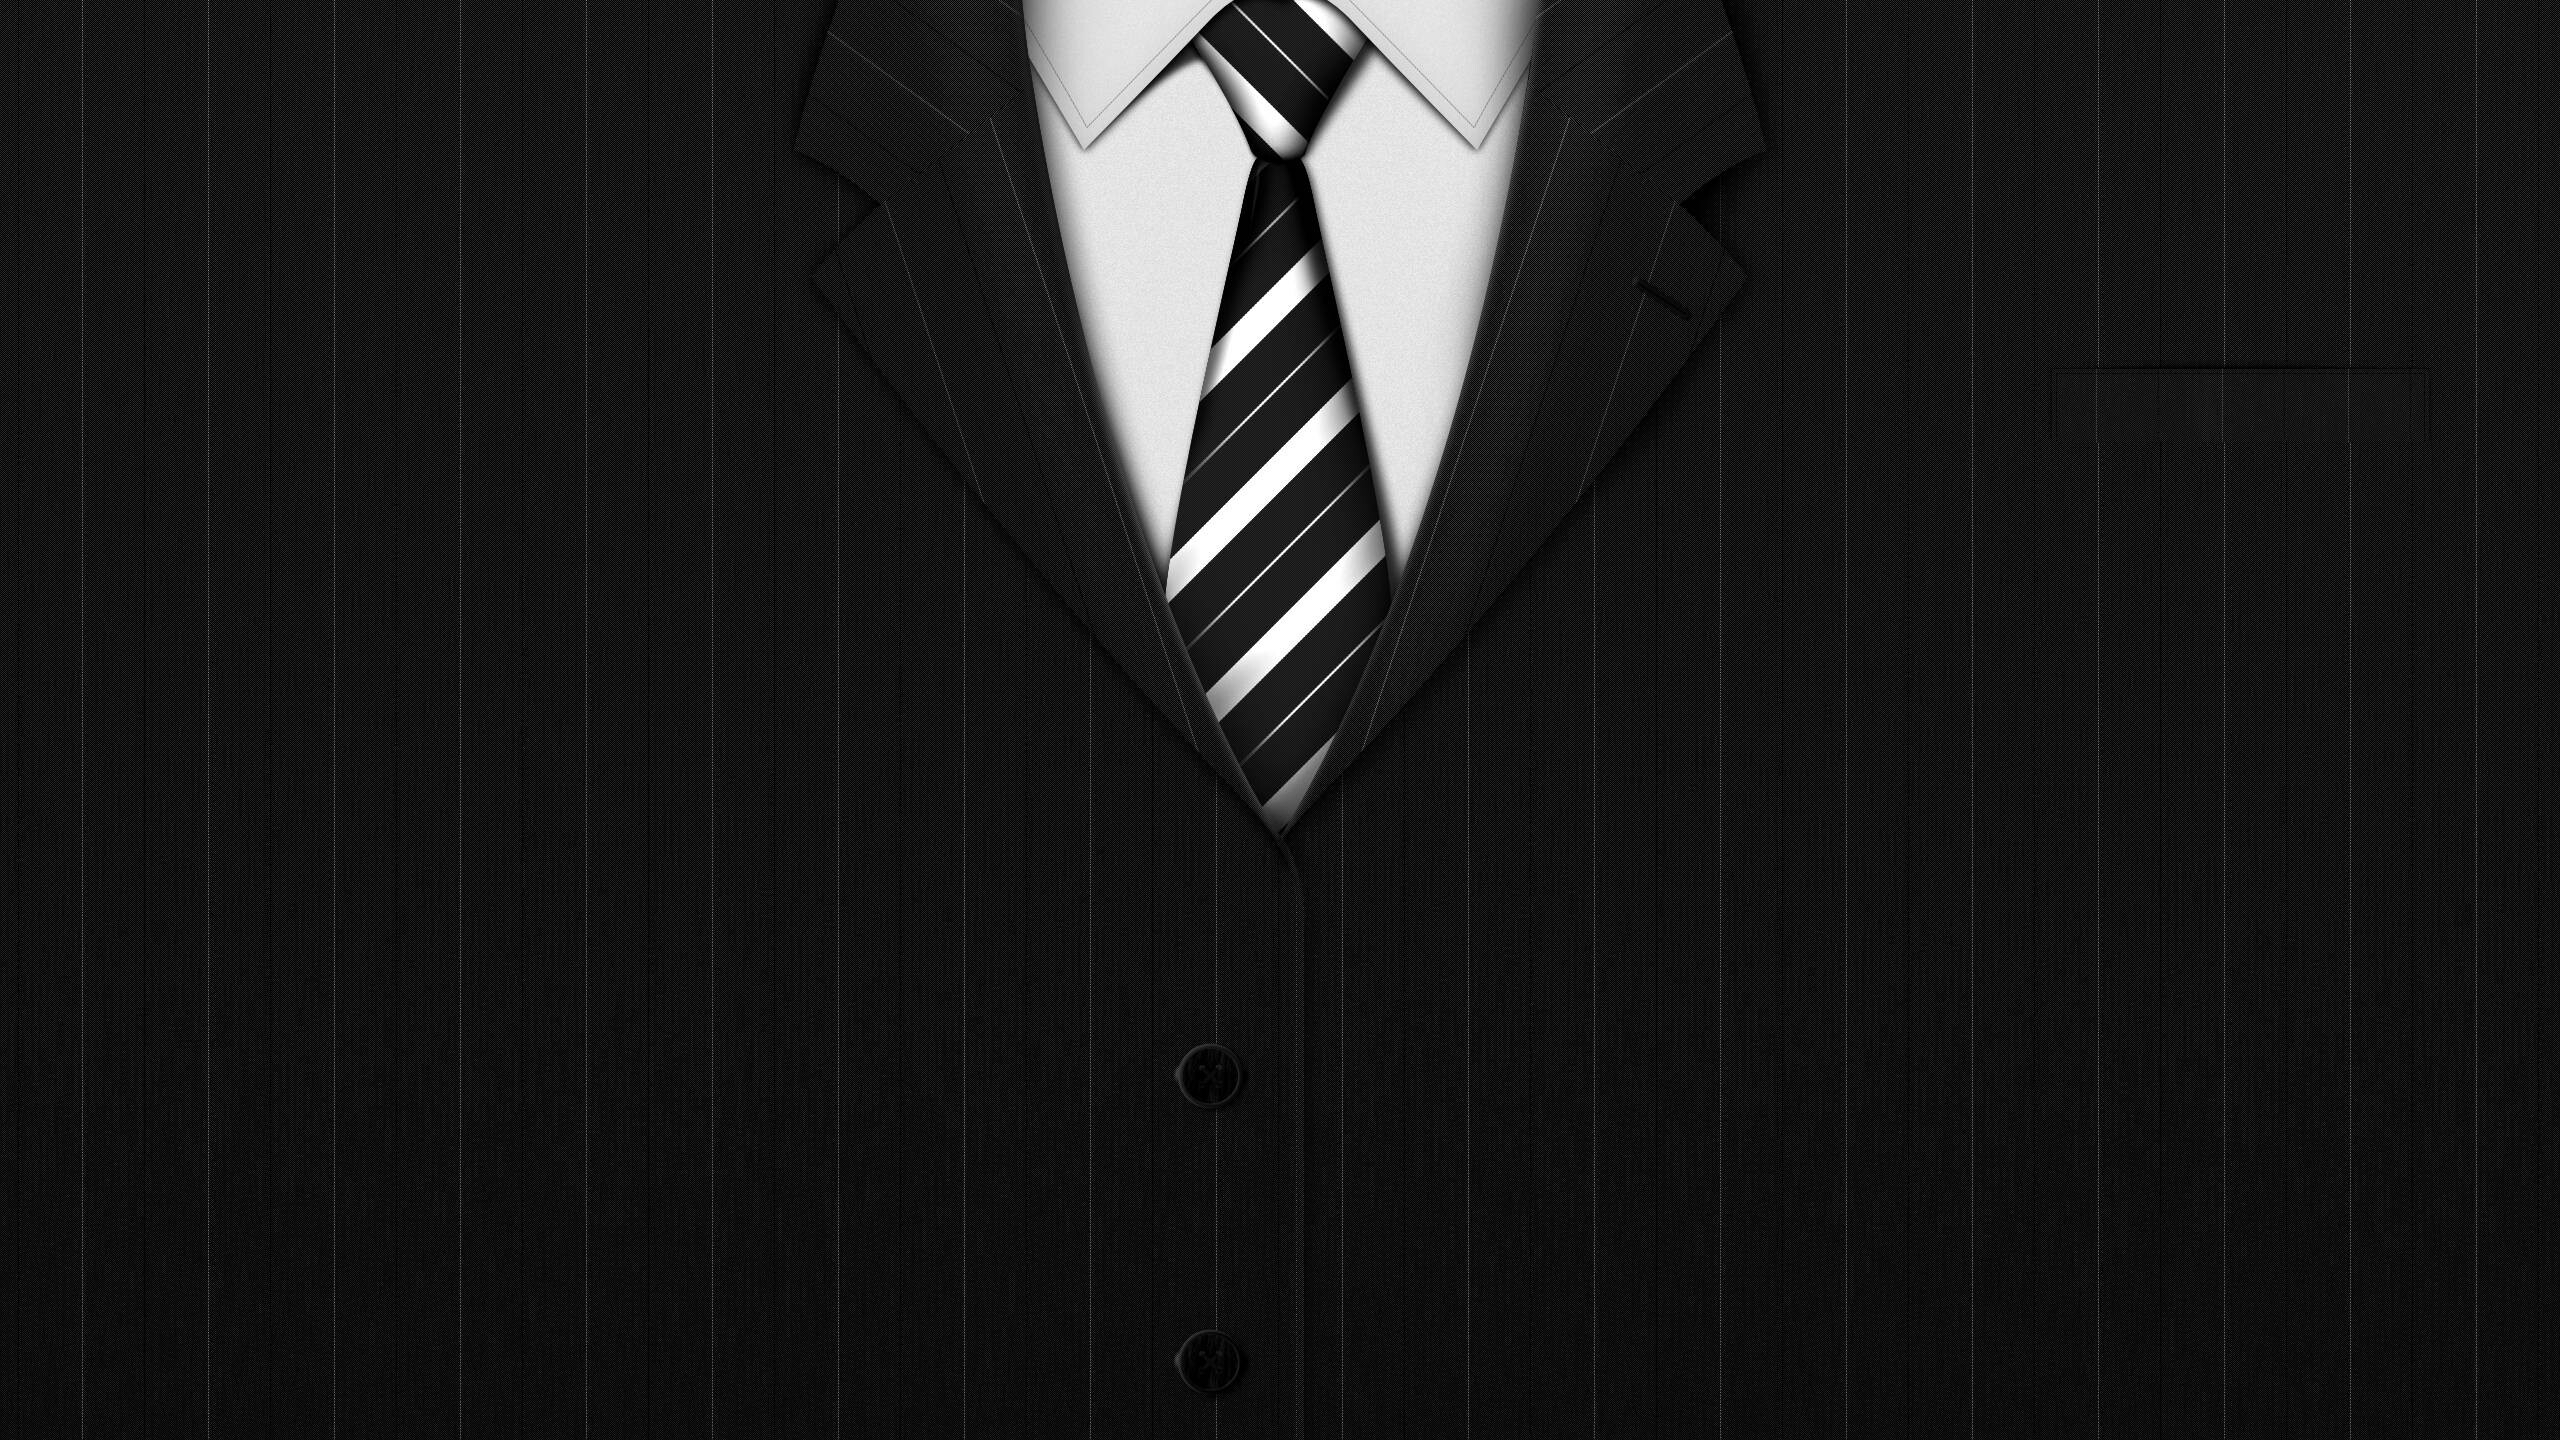 Gentleman: A person whose conduct conforms to a high standard of propriety or correct behavior. 2560x1440 HD Background.